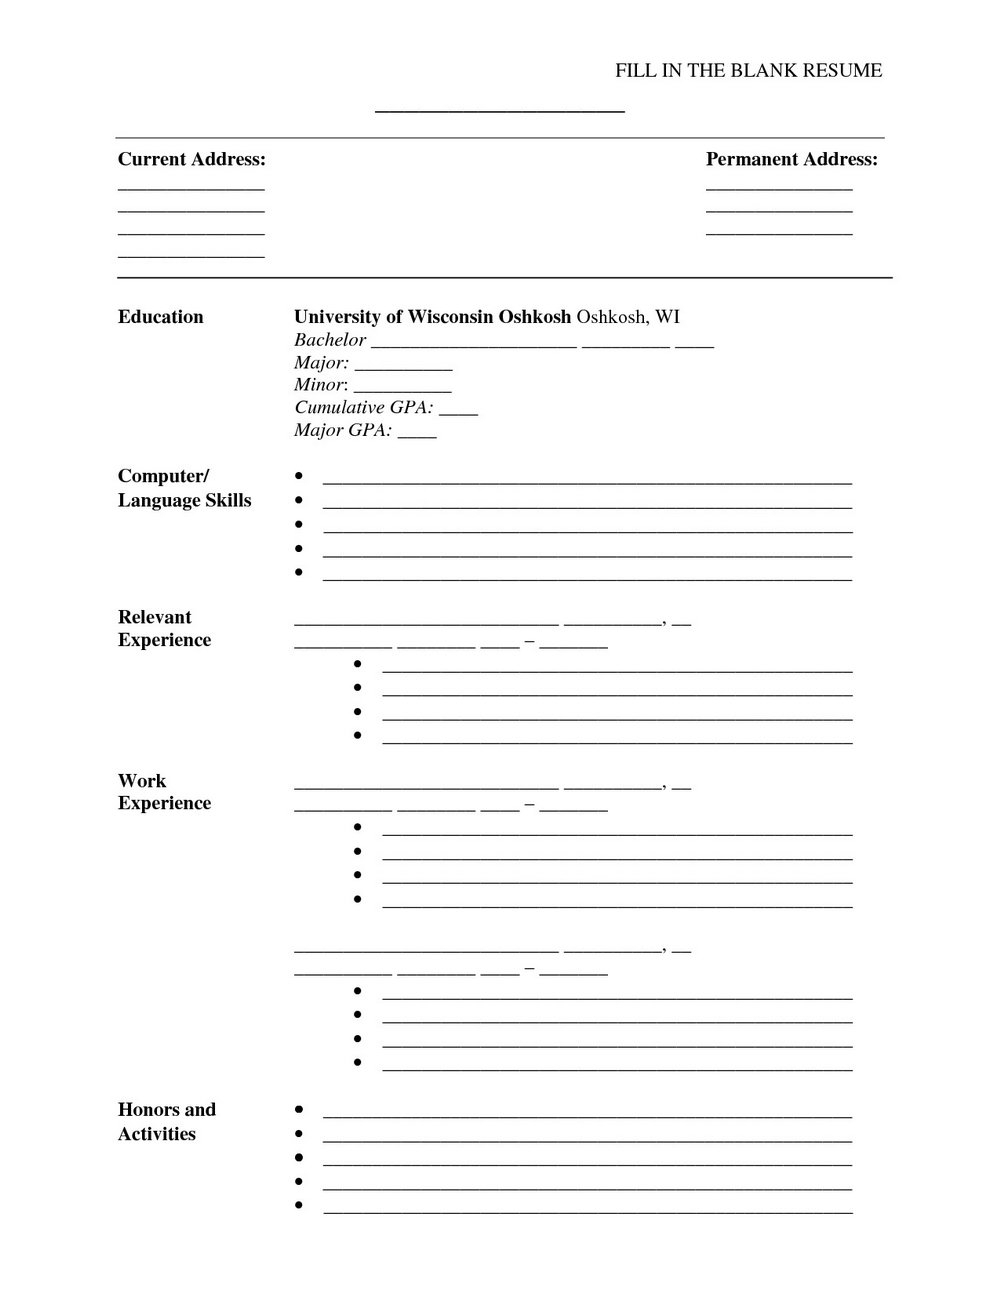 Fill In The Blank Resume Template For Highschool Students | Mbm Legal regarding Fill In The Blank Template